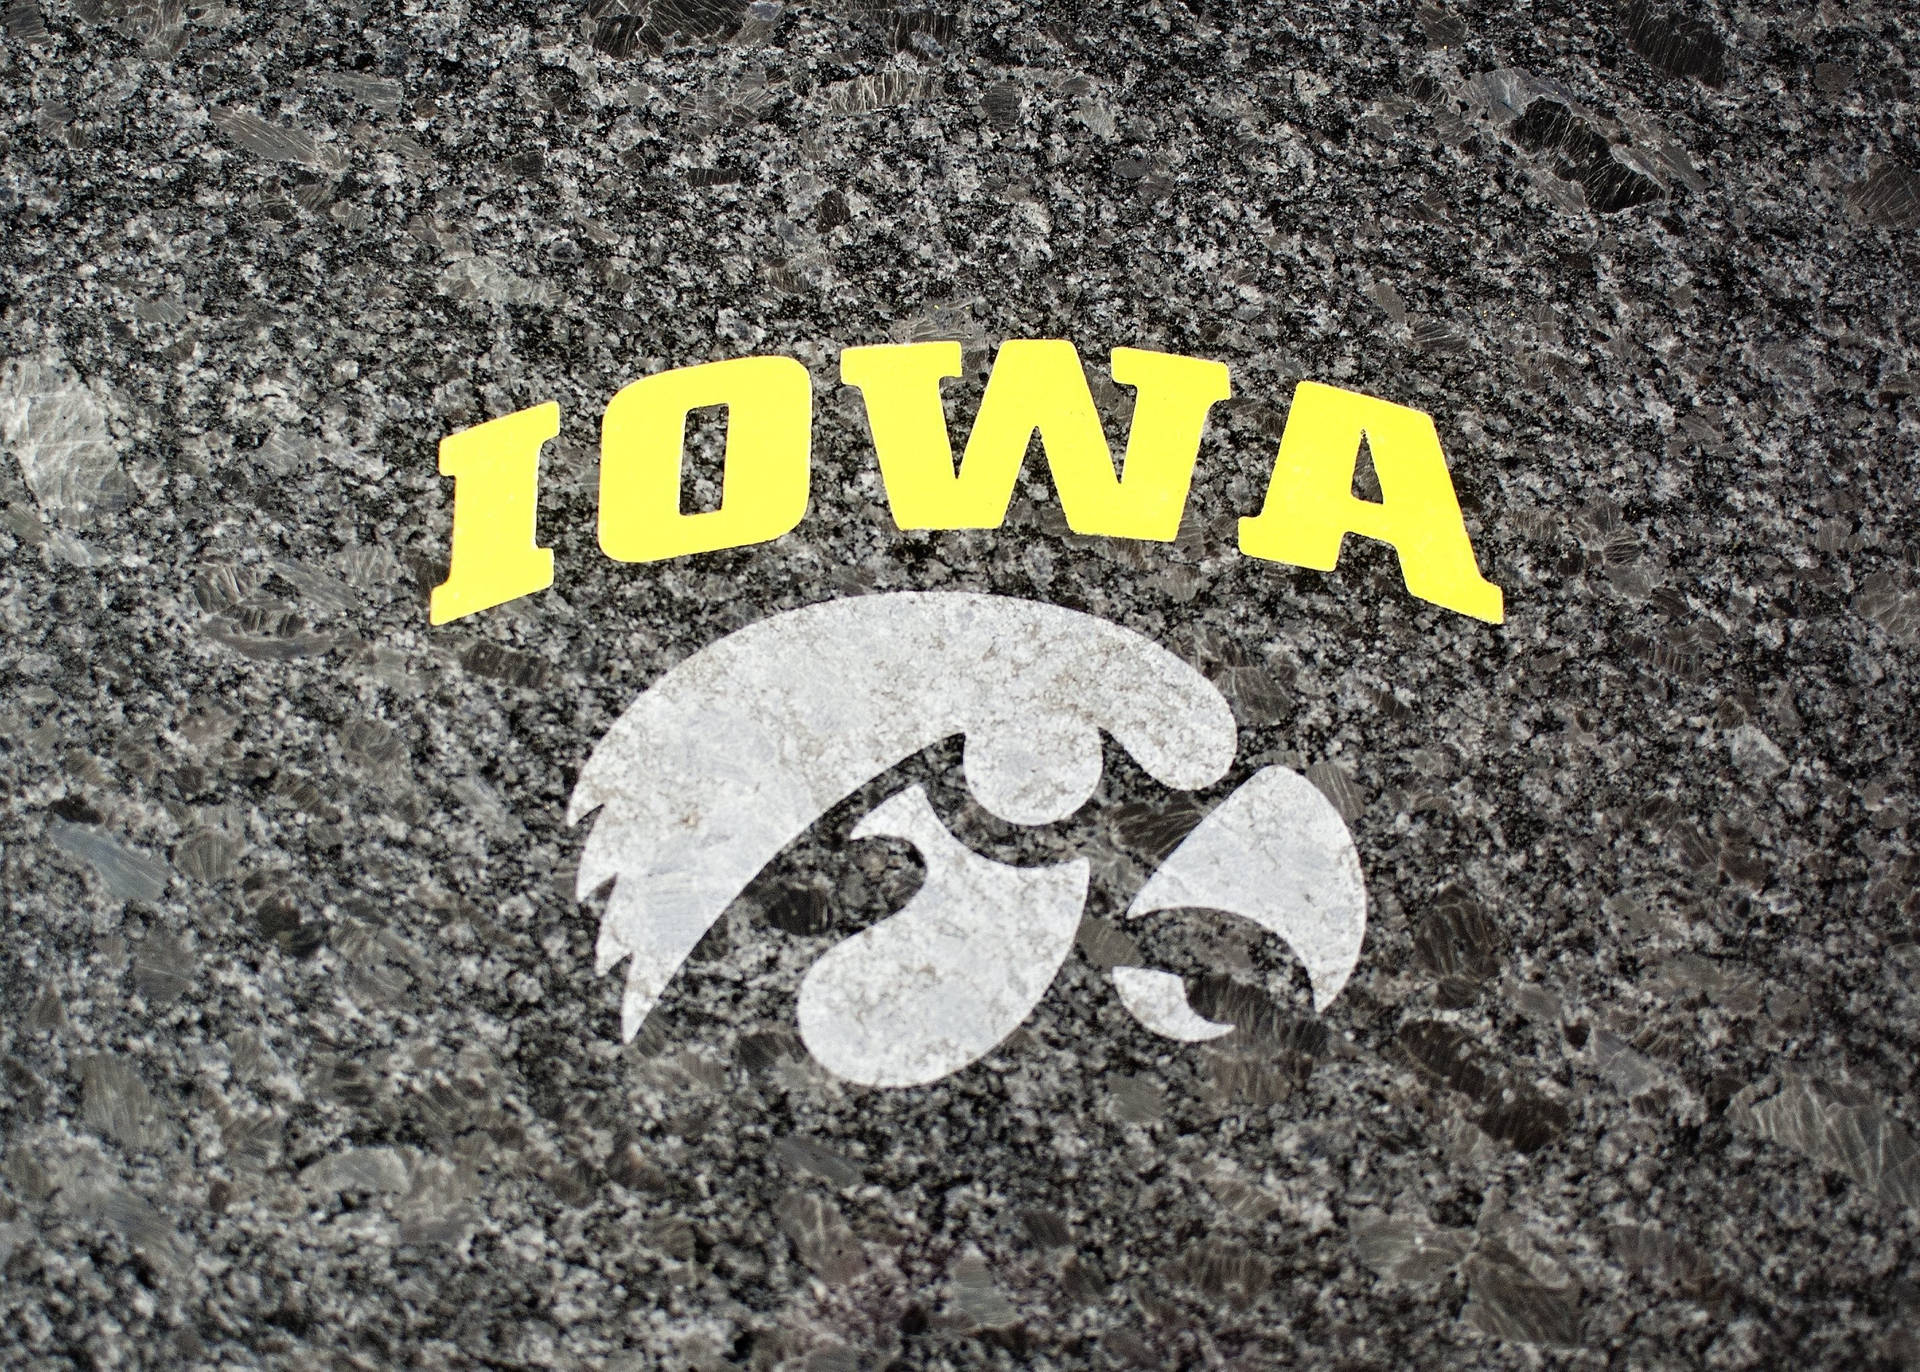 The Irresistible Strength Of The Iowa Hawkeyes Captured In A Striking Image. Background